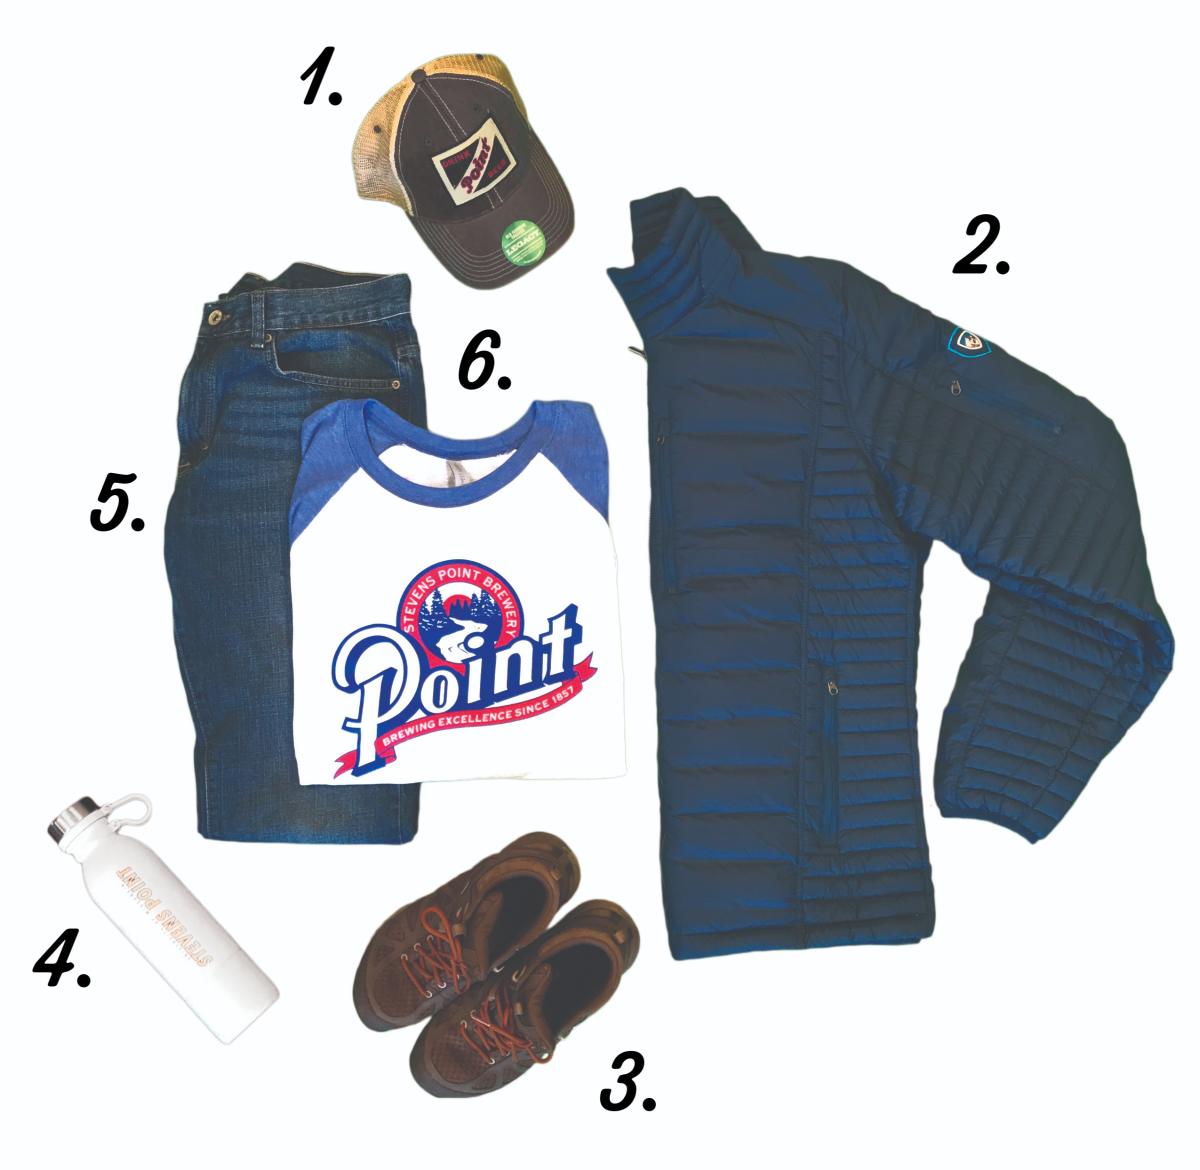 Get out on the trails of the Green Circle and beyond with an outfit sported by items from Stevens Point Area shops!